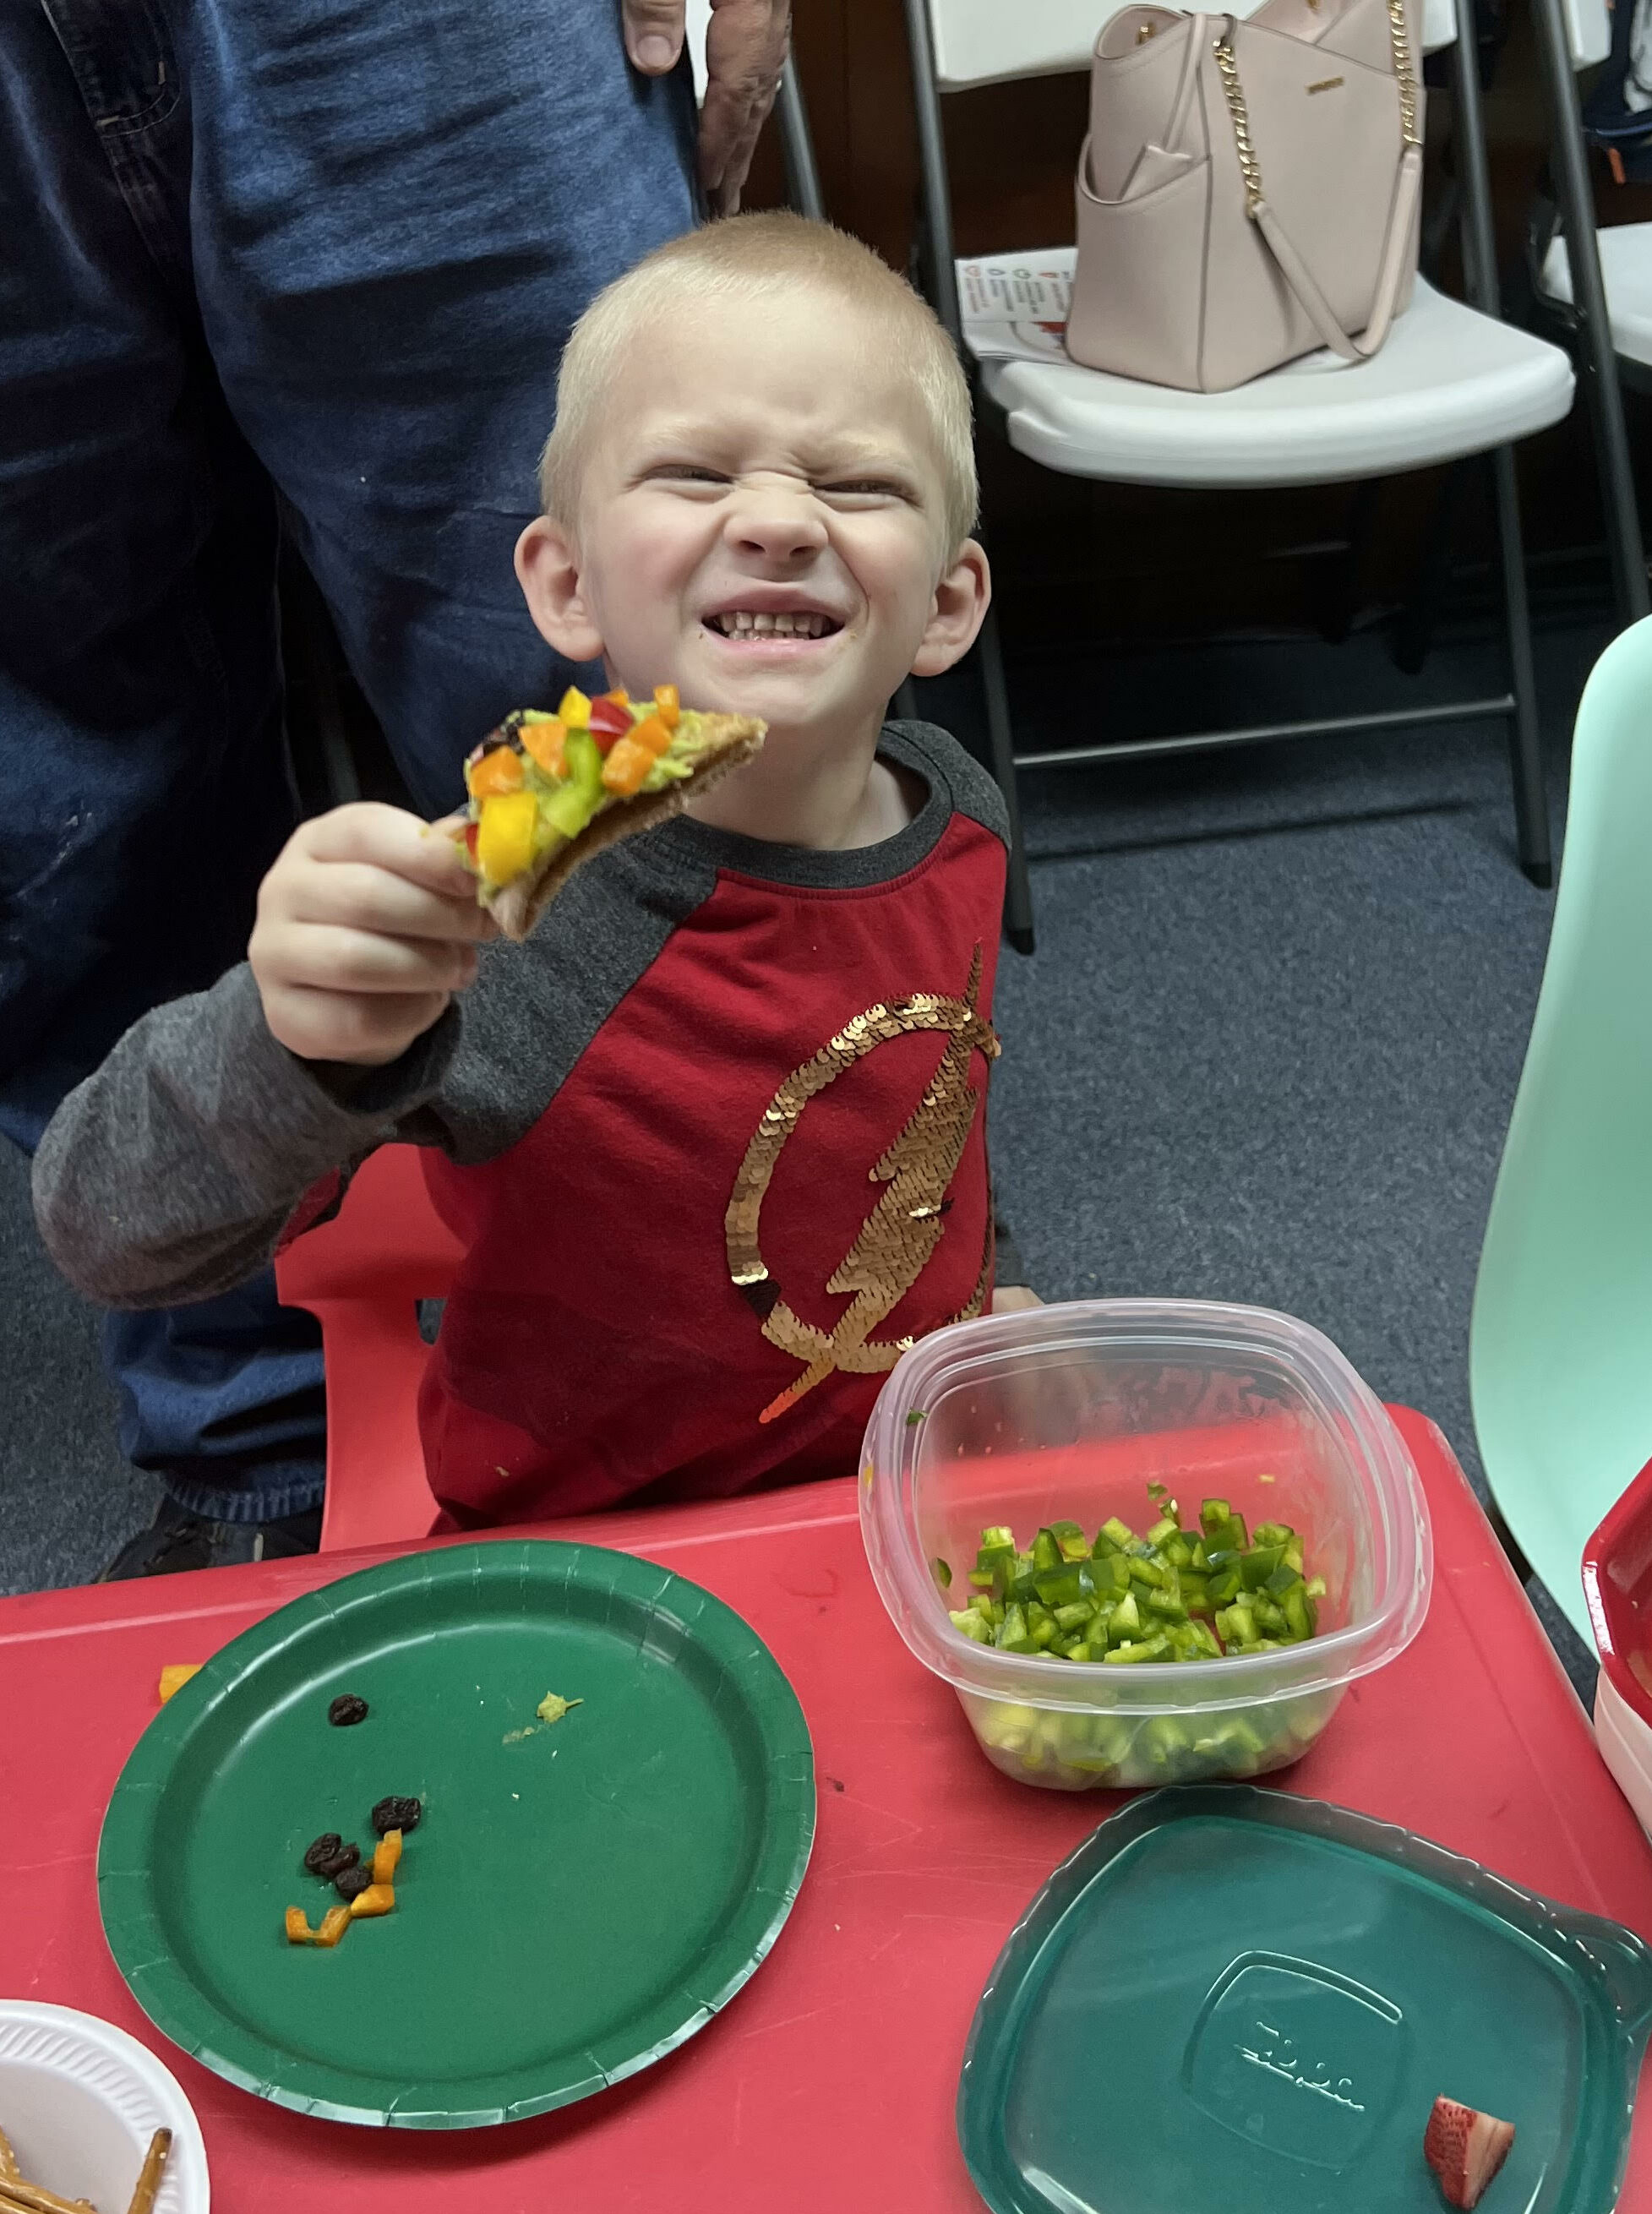 Healthy Snack is a Hit with Kids